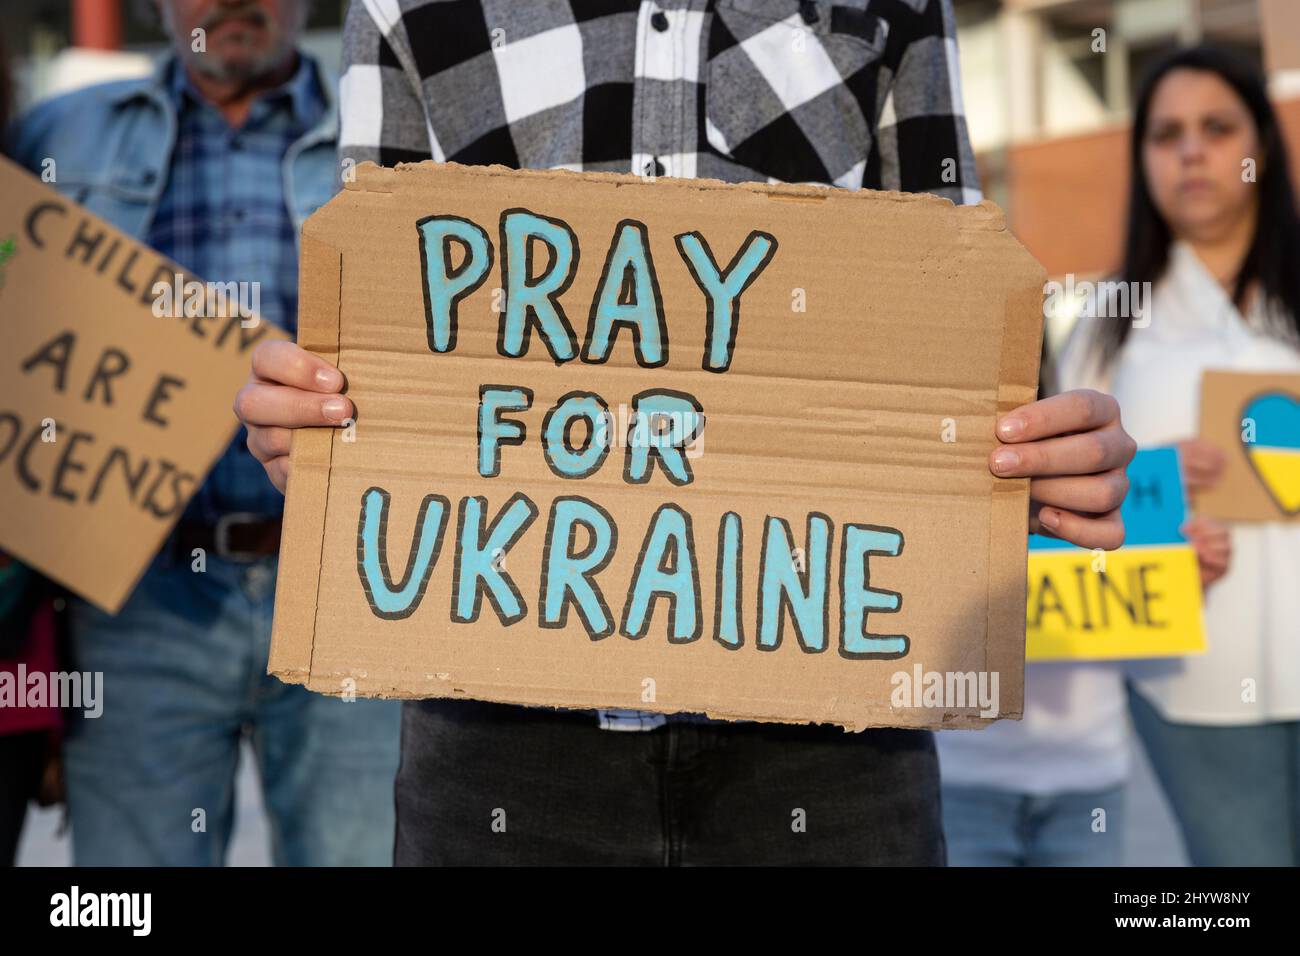 A boy demonstrator shows a cardboard sign in support of the Ukrainian people during an anti-war street protest. Stock Photo